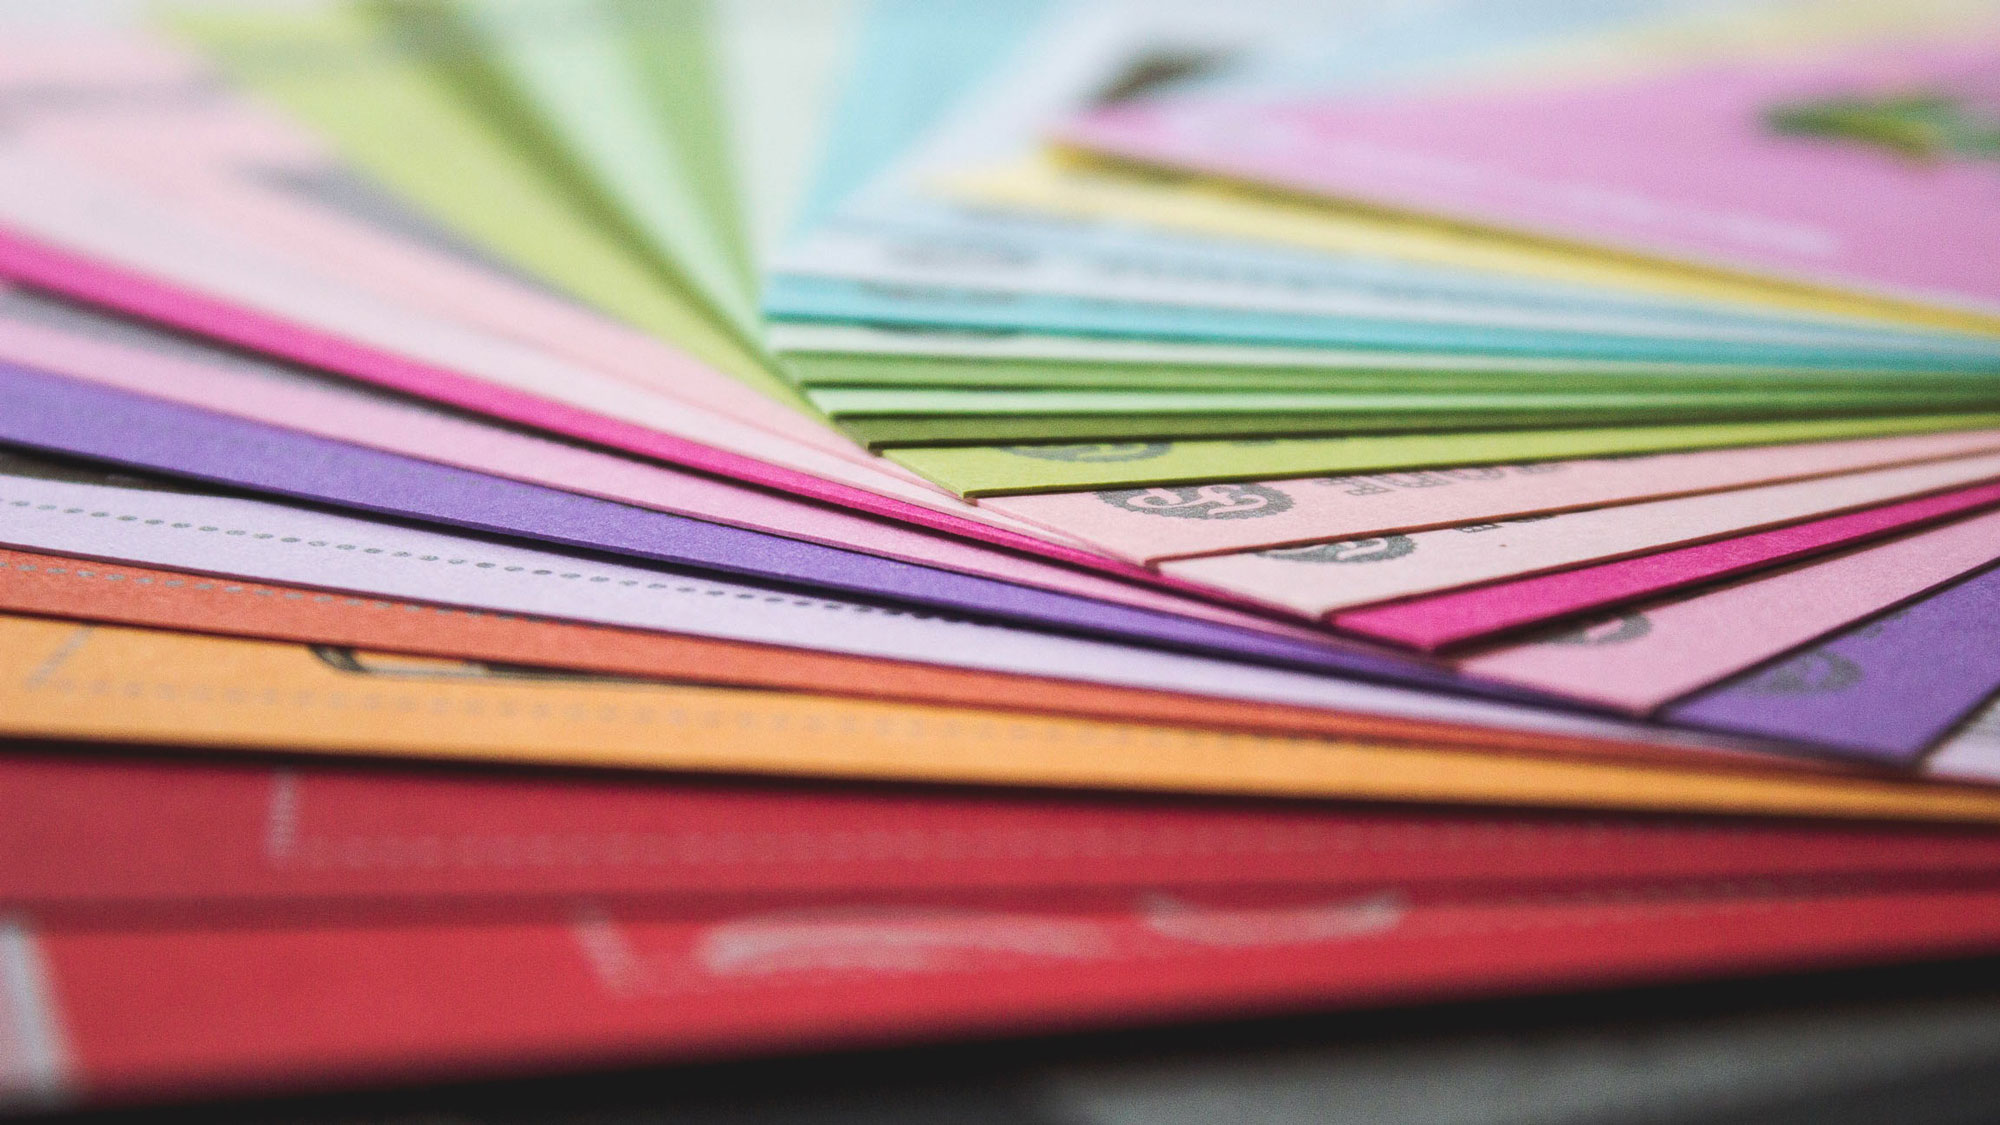 Printed paper in different colors